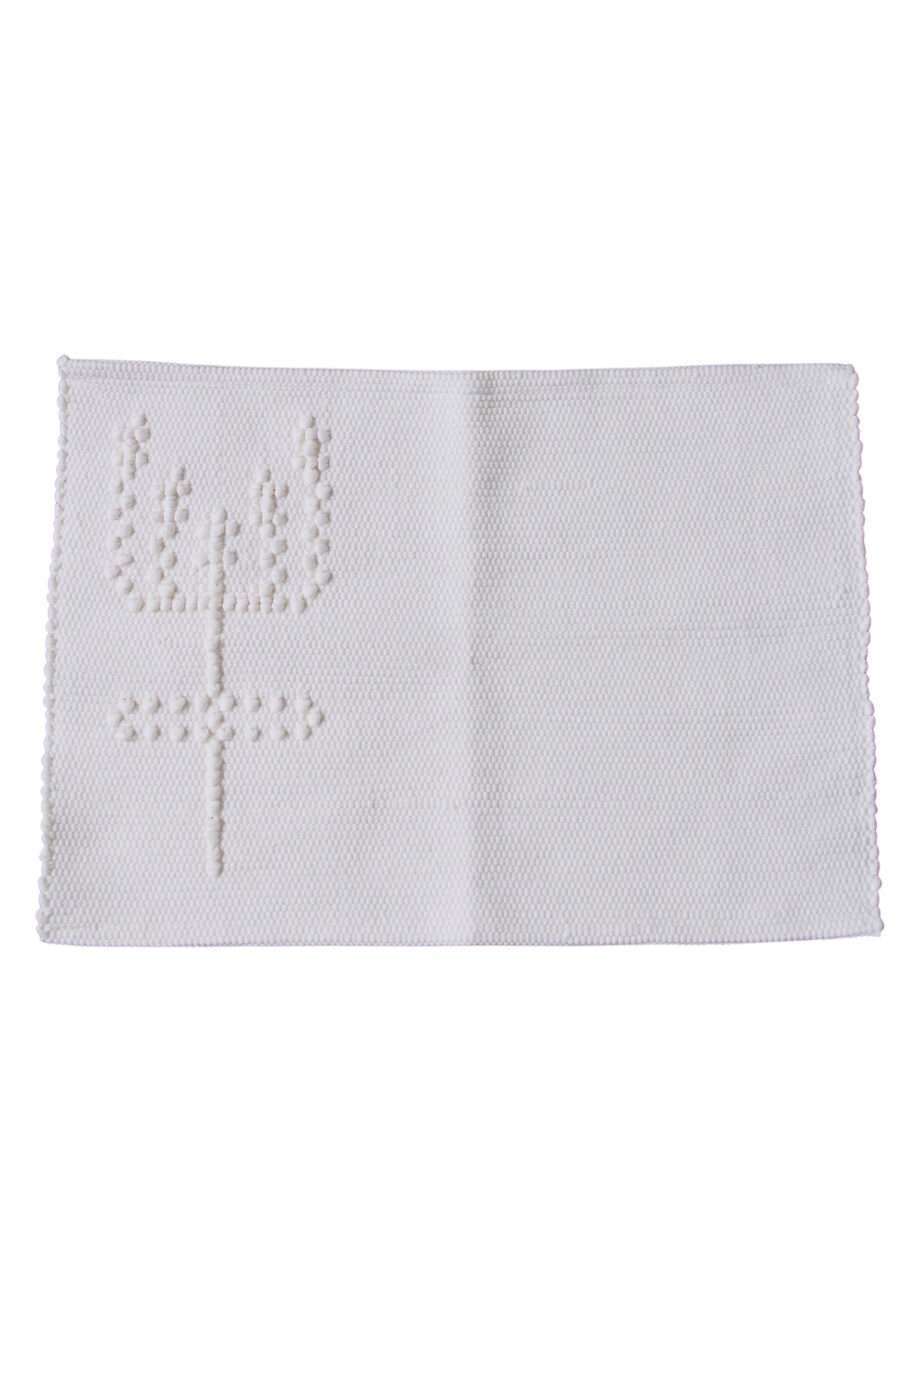 summerflowers off-white woven cotton placemat small